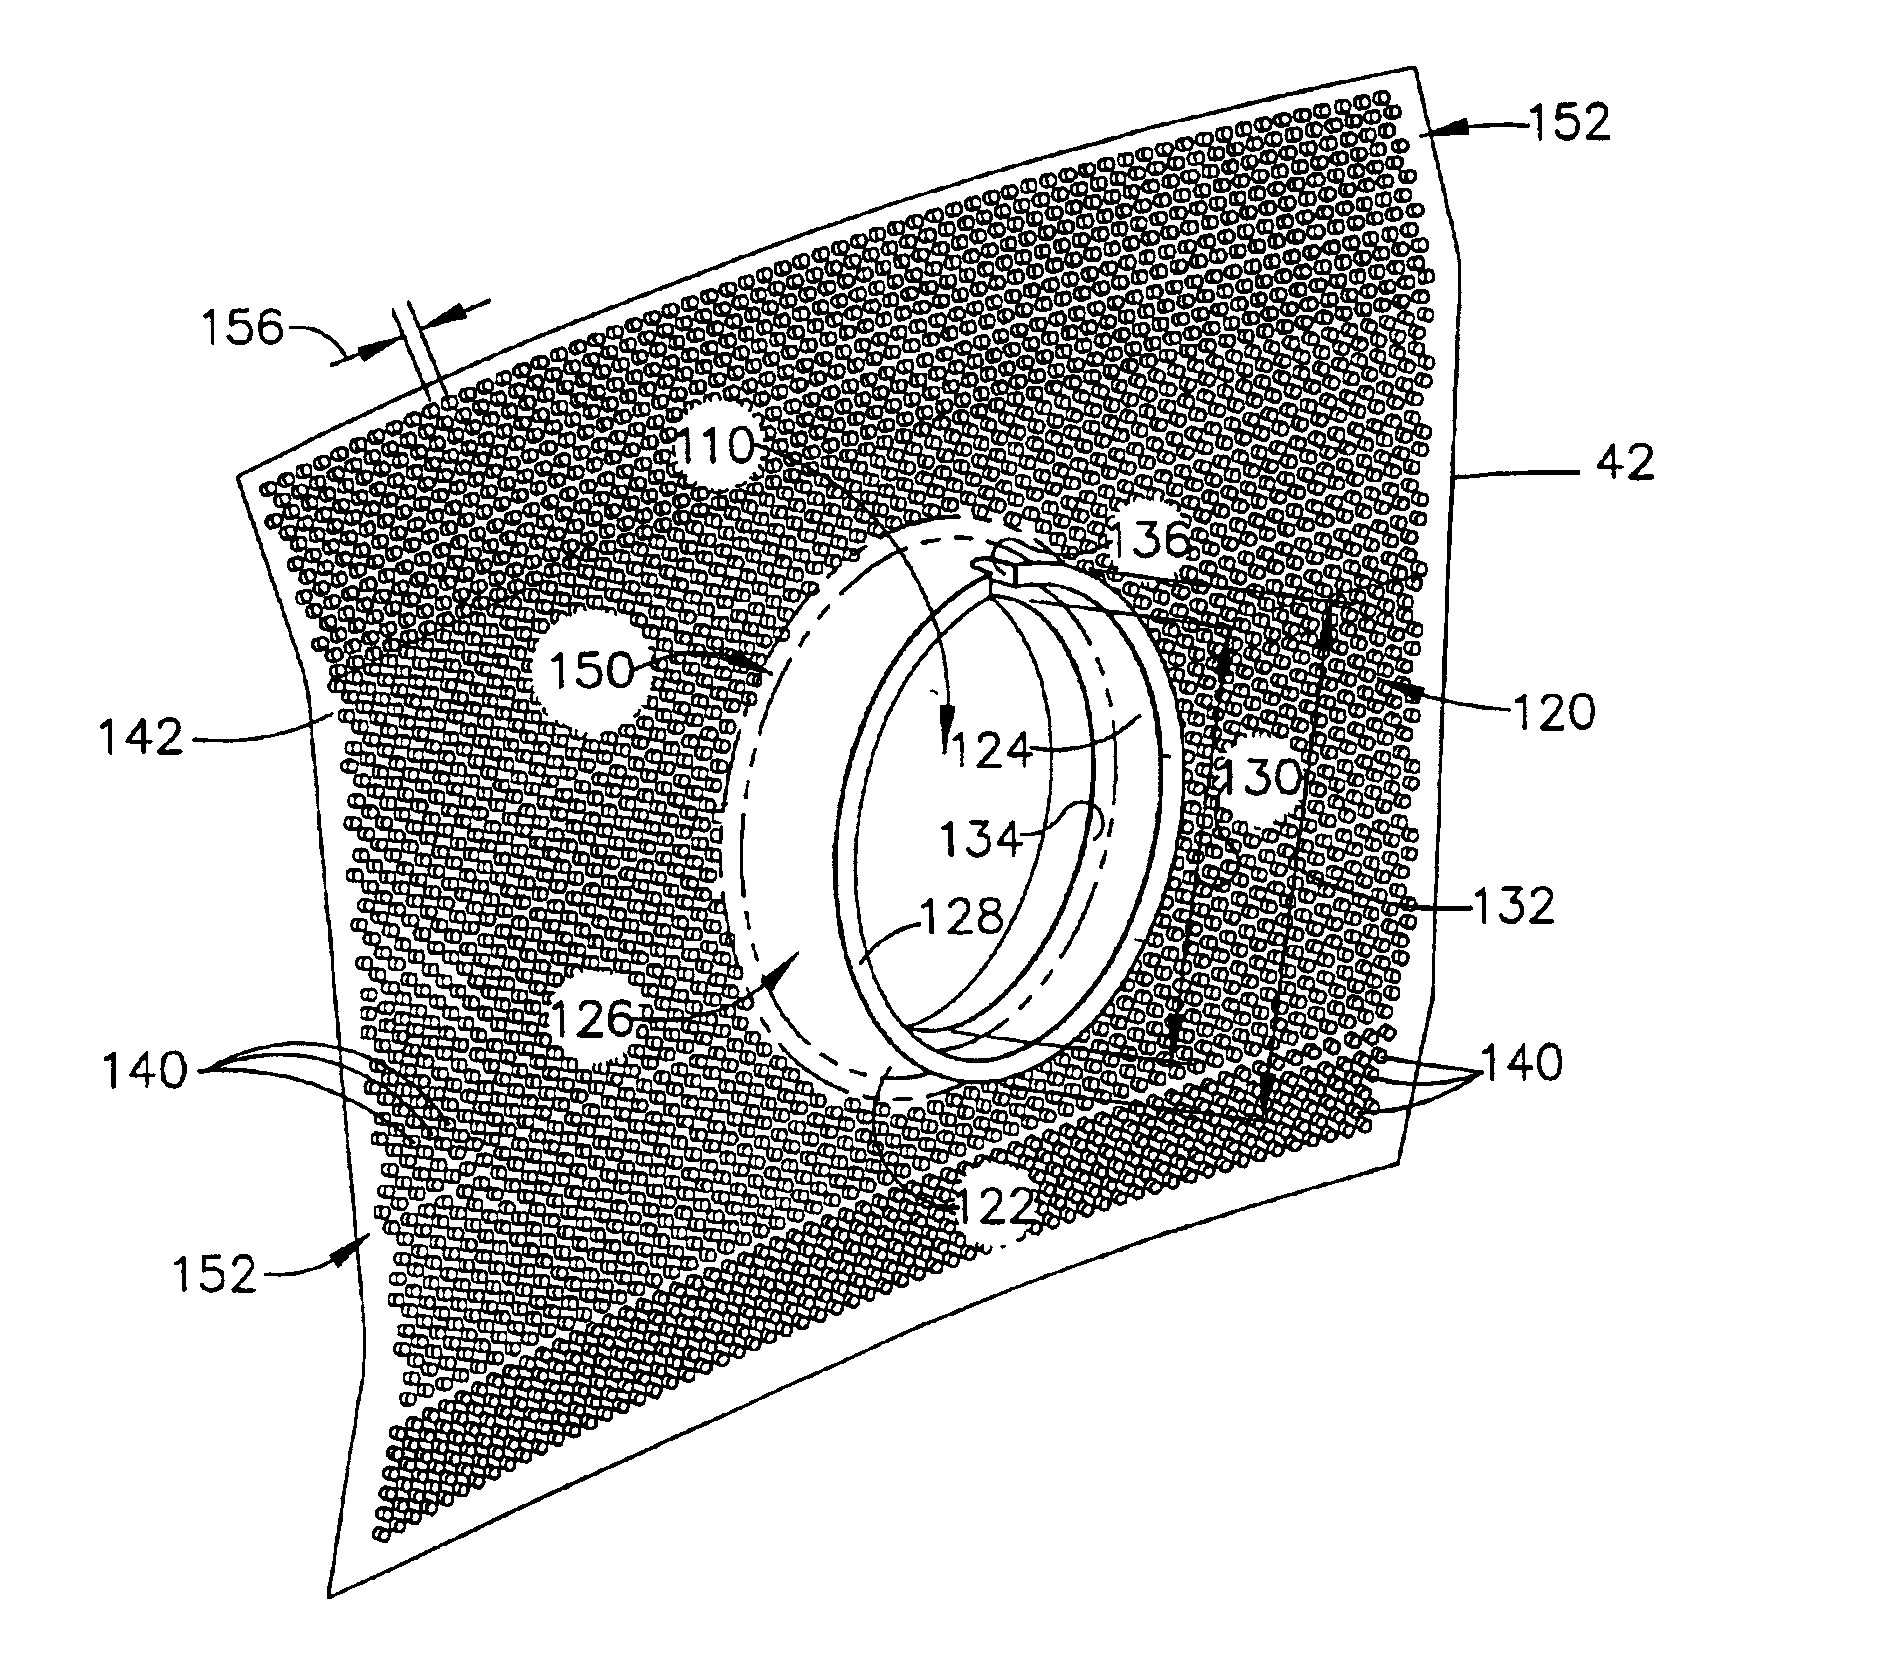 Method for increasing heat transfer from combustors